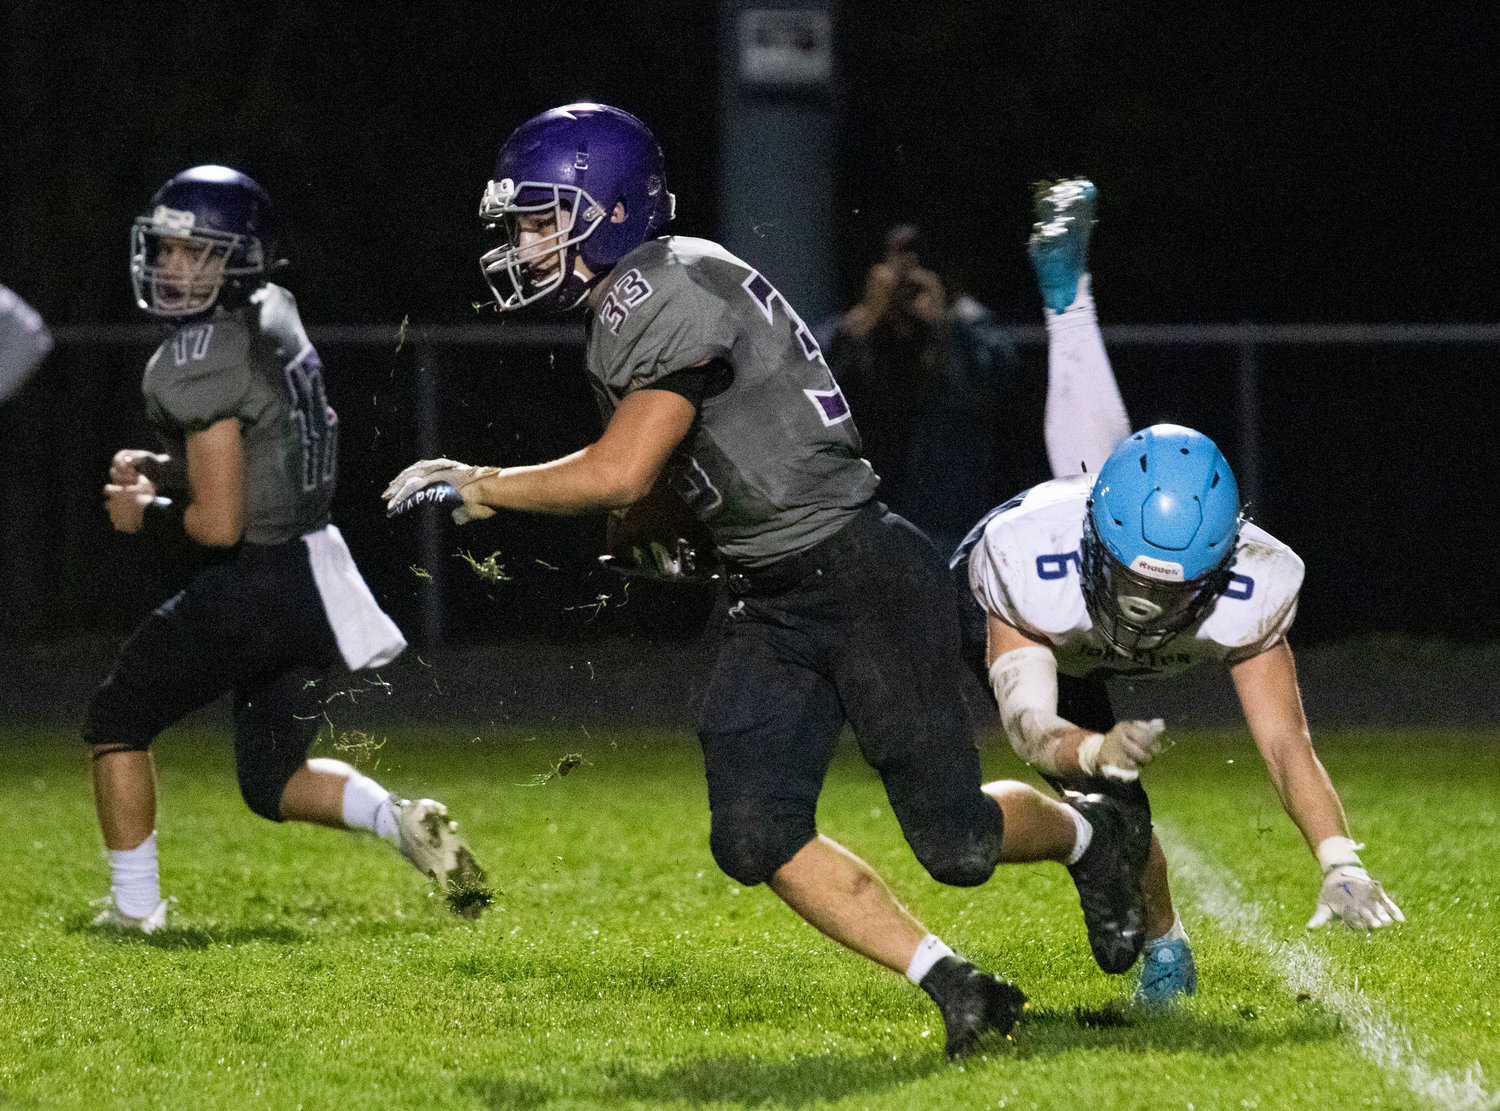 Huskies senior running back Brock Pacheco bursts up the middle for a big gain. Pacheco rushed for 117 yards and a touchdown and has 667 rushing yards on the season.